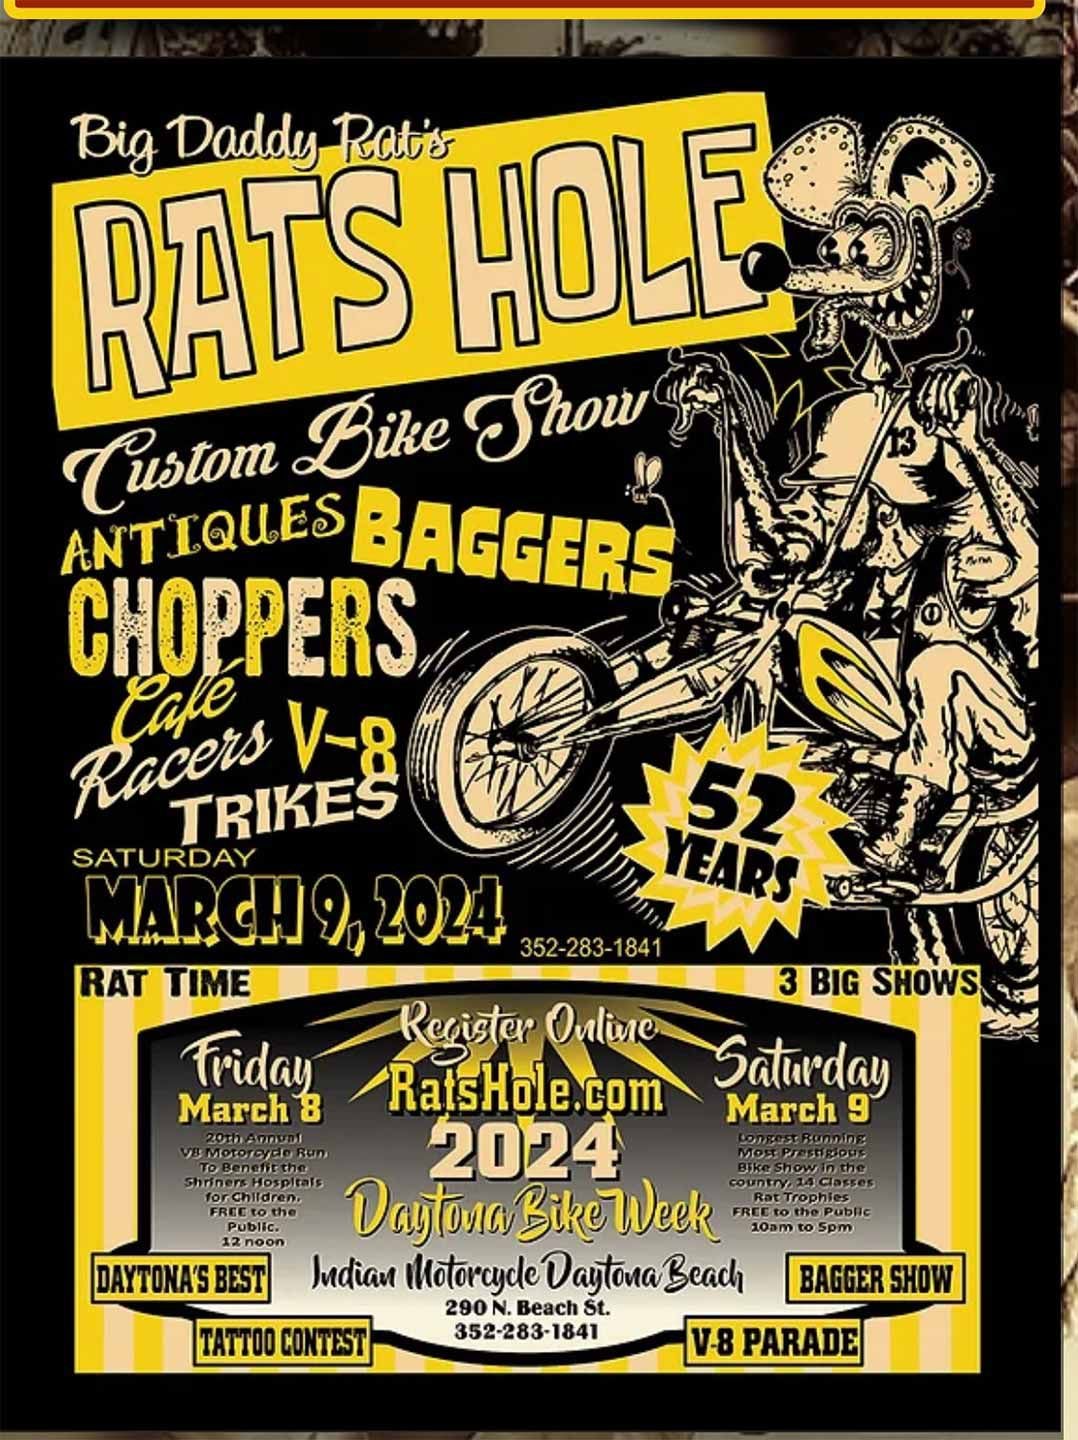 Super bummed to have missed the annual Rat’s Hole custom show at the Daytona Indian dealership this year, but we understand it was a doozy.